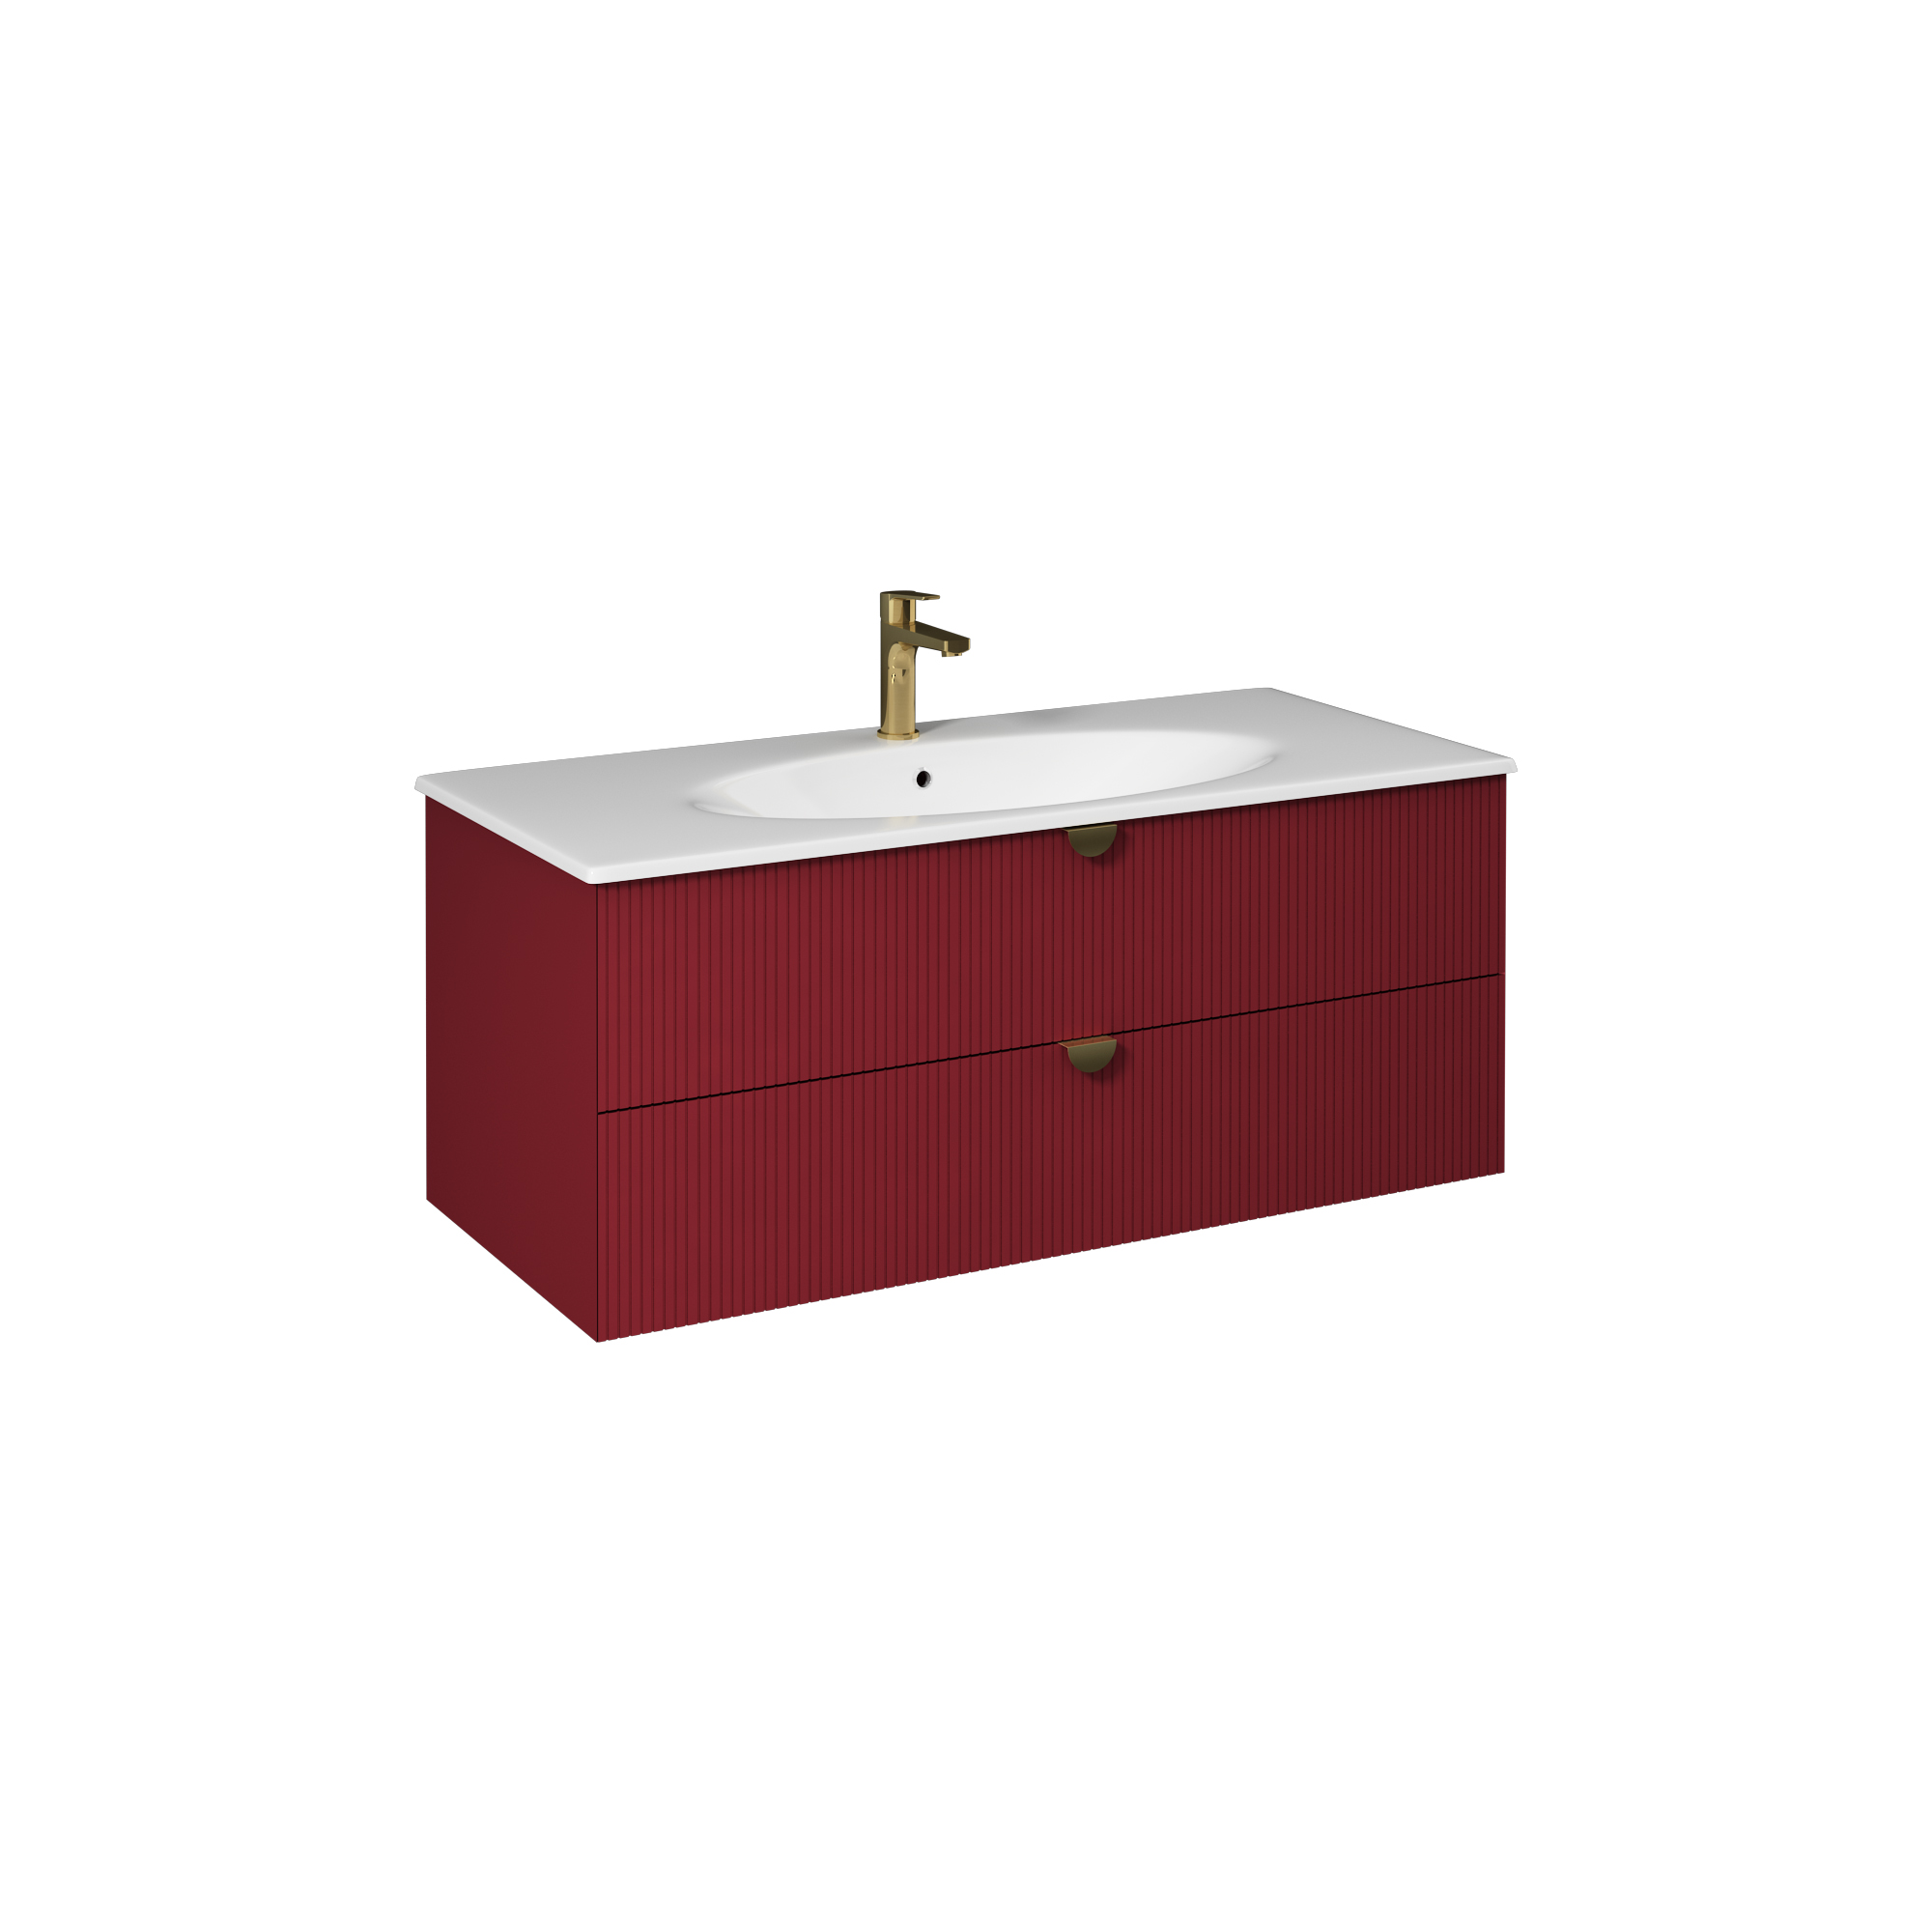 Infinity Washbasin Cabinet, Ruby Red, Handle Bright Anodizing  47"